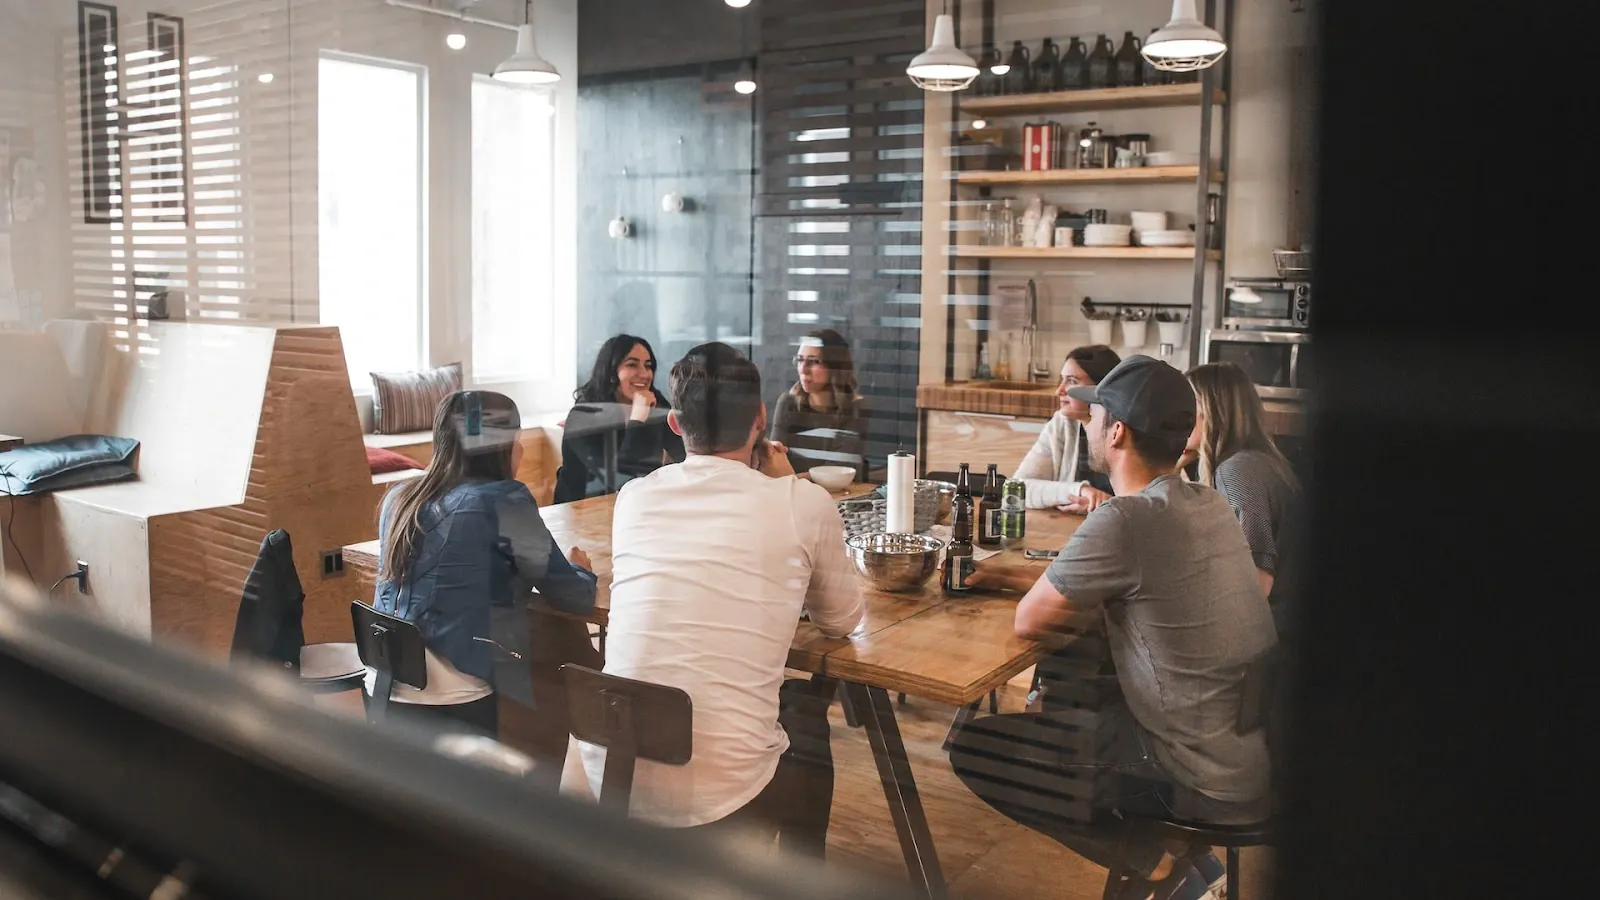 Common challenges when running a coworking space and how to overcome them